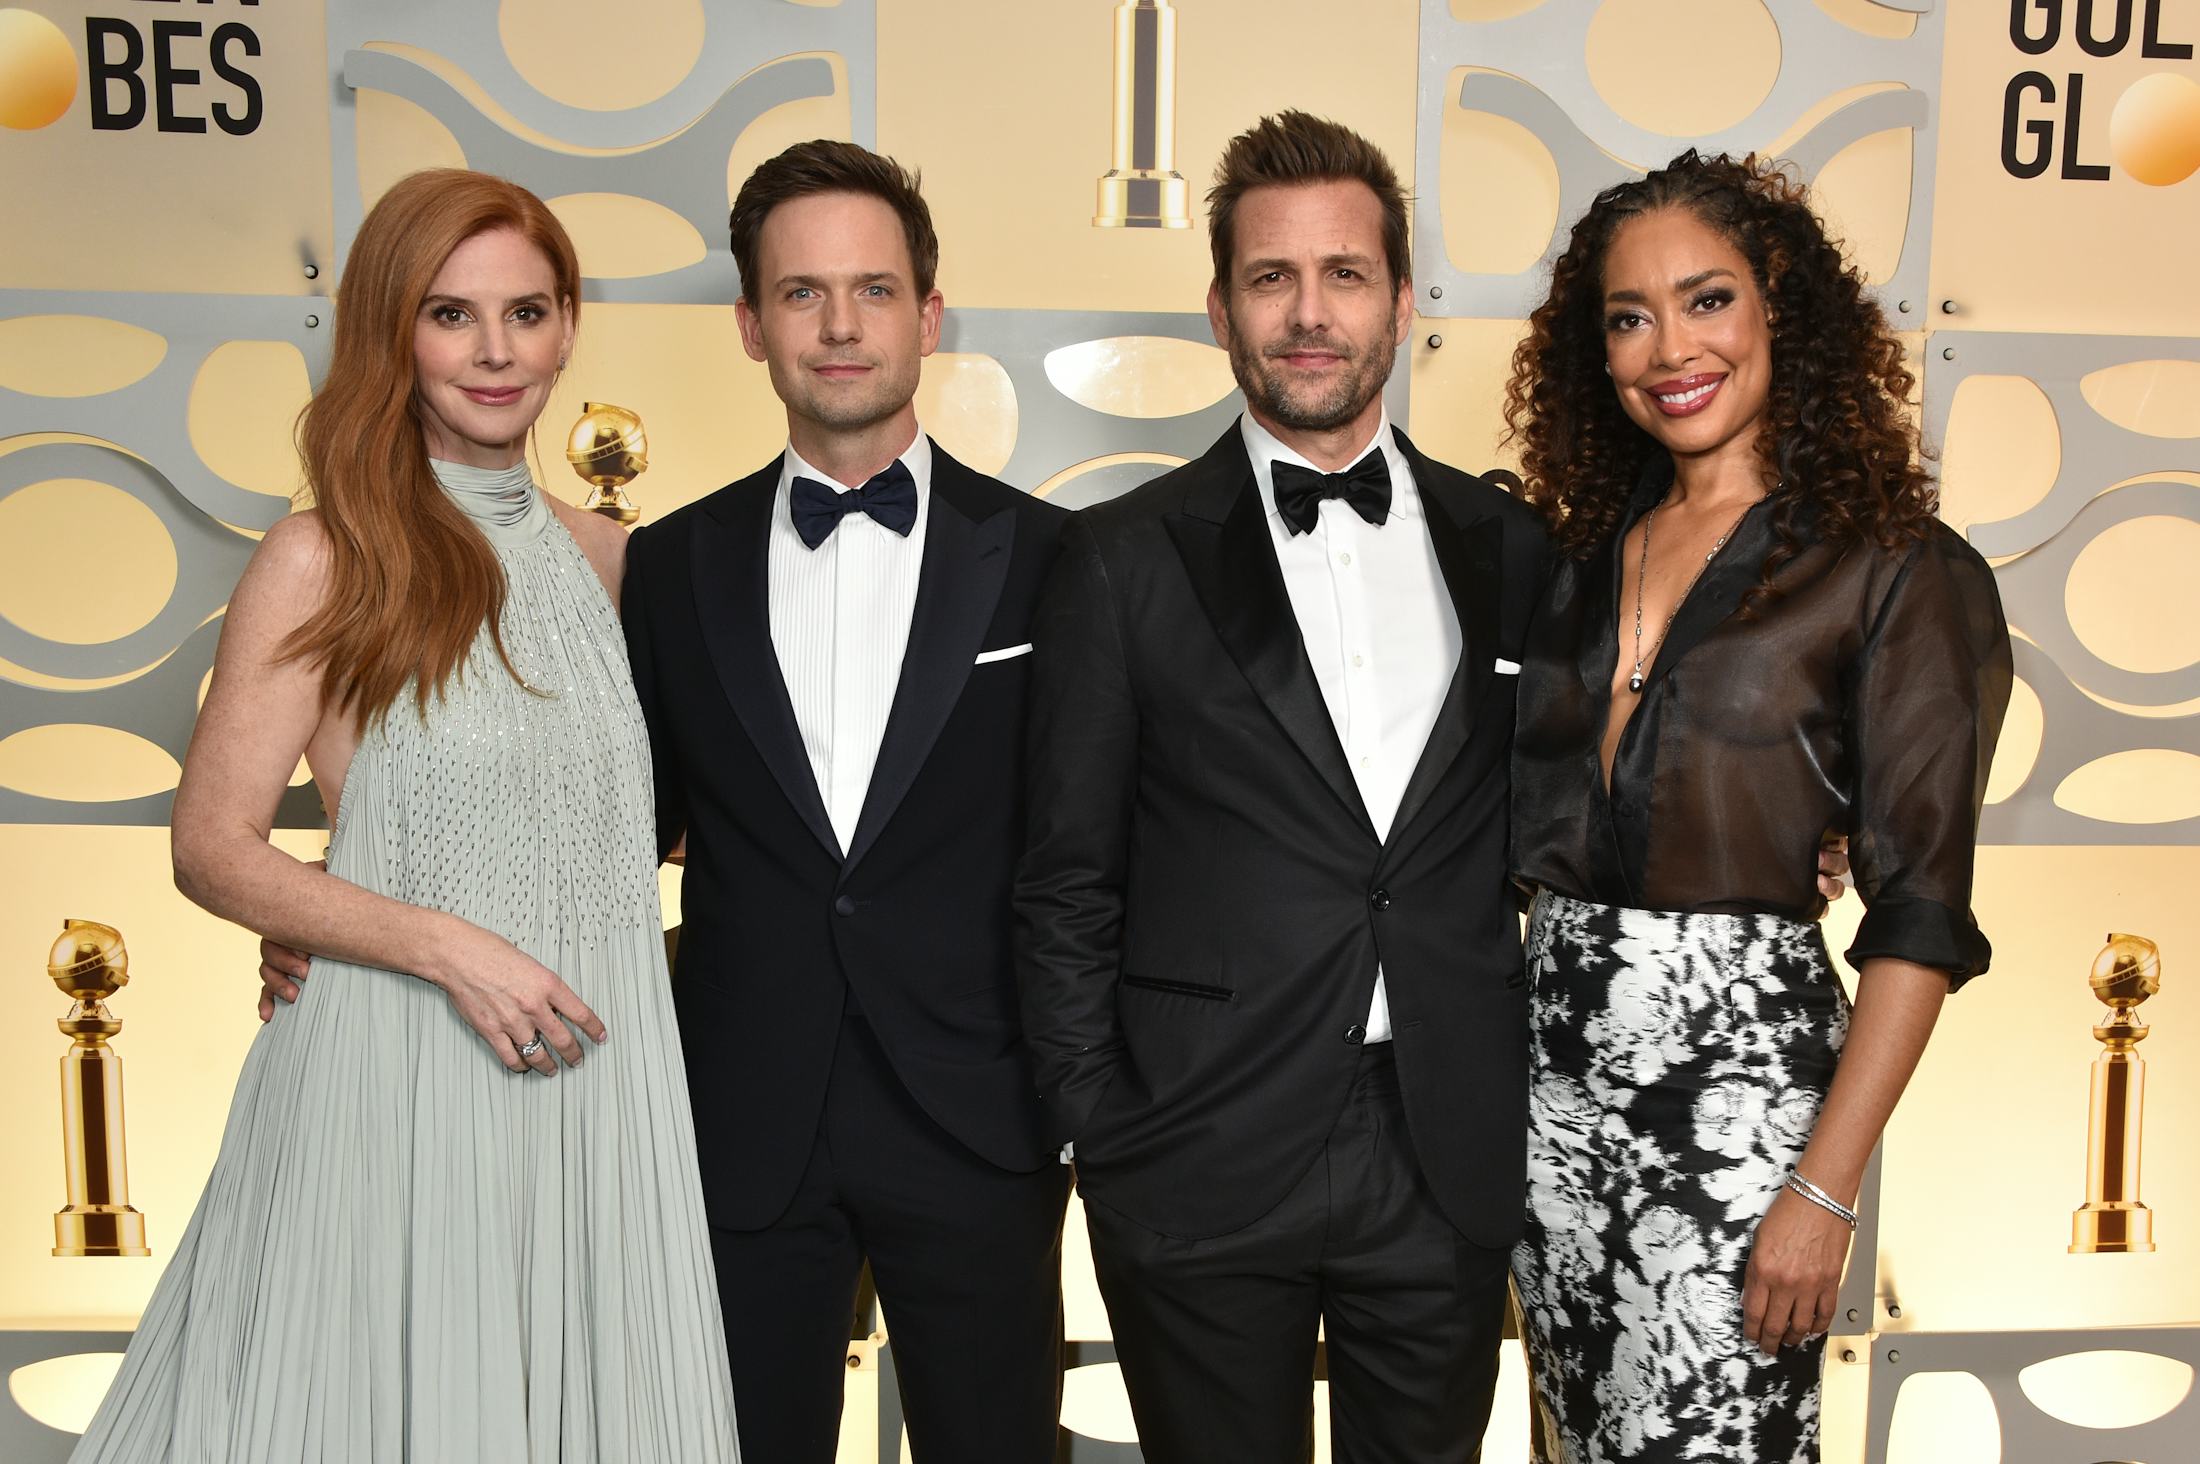 'Suits' Cast Reunion At The Golden Globe Awards Goes Viral